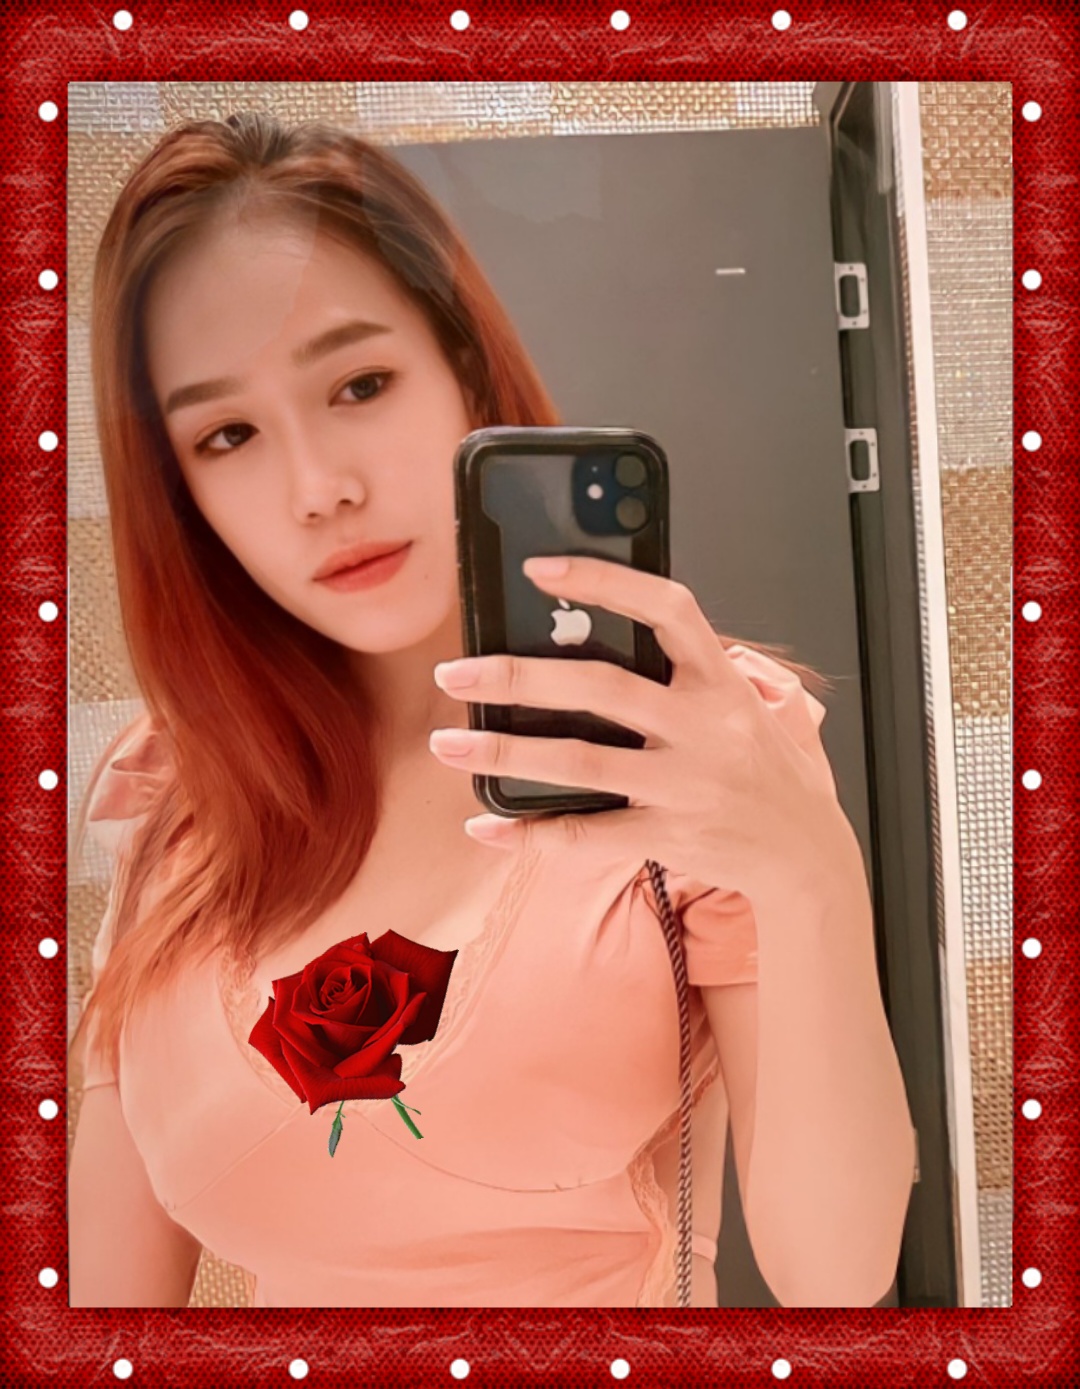 Lifestyle Outcall Massage Service in Bangkok